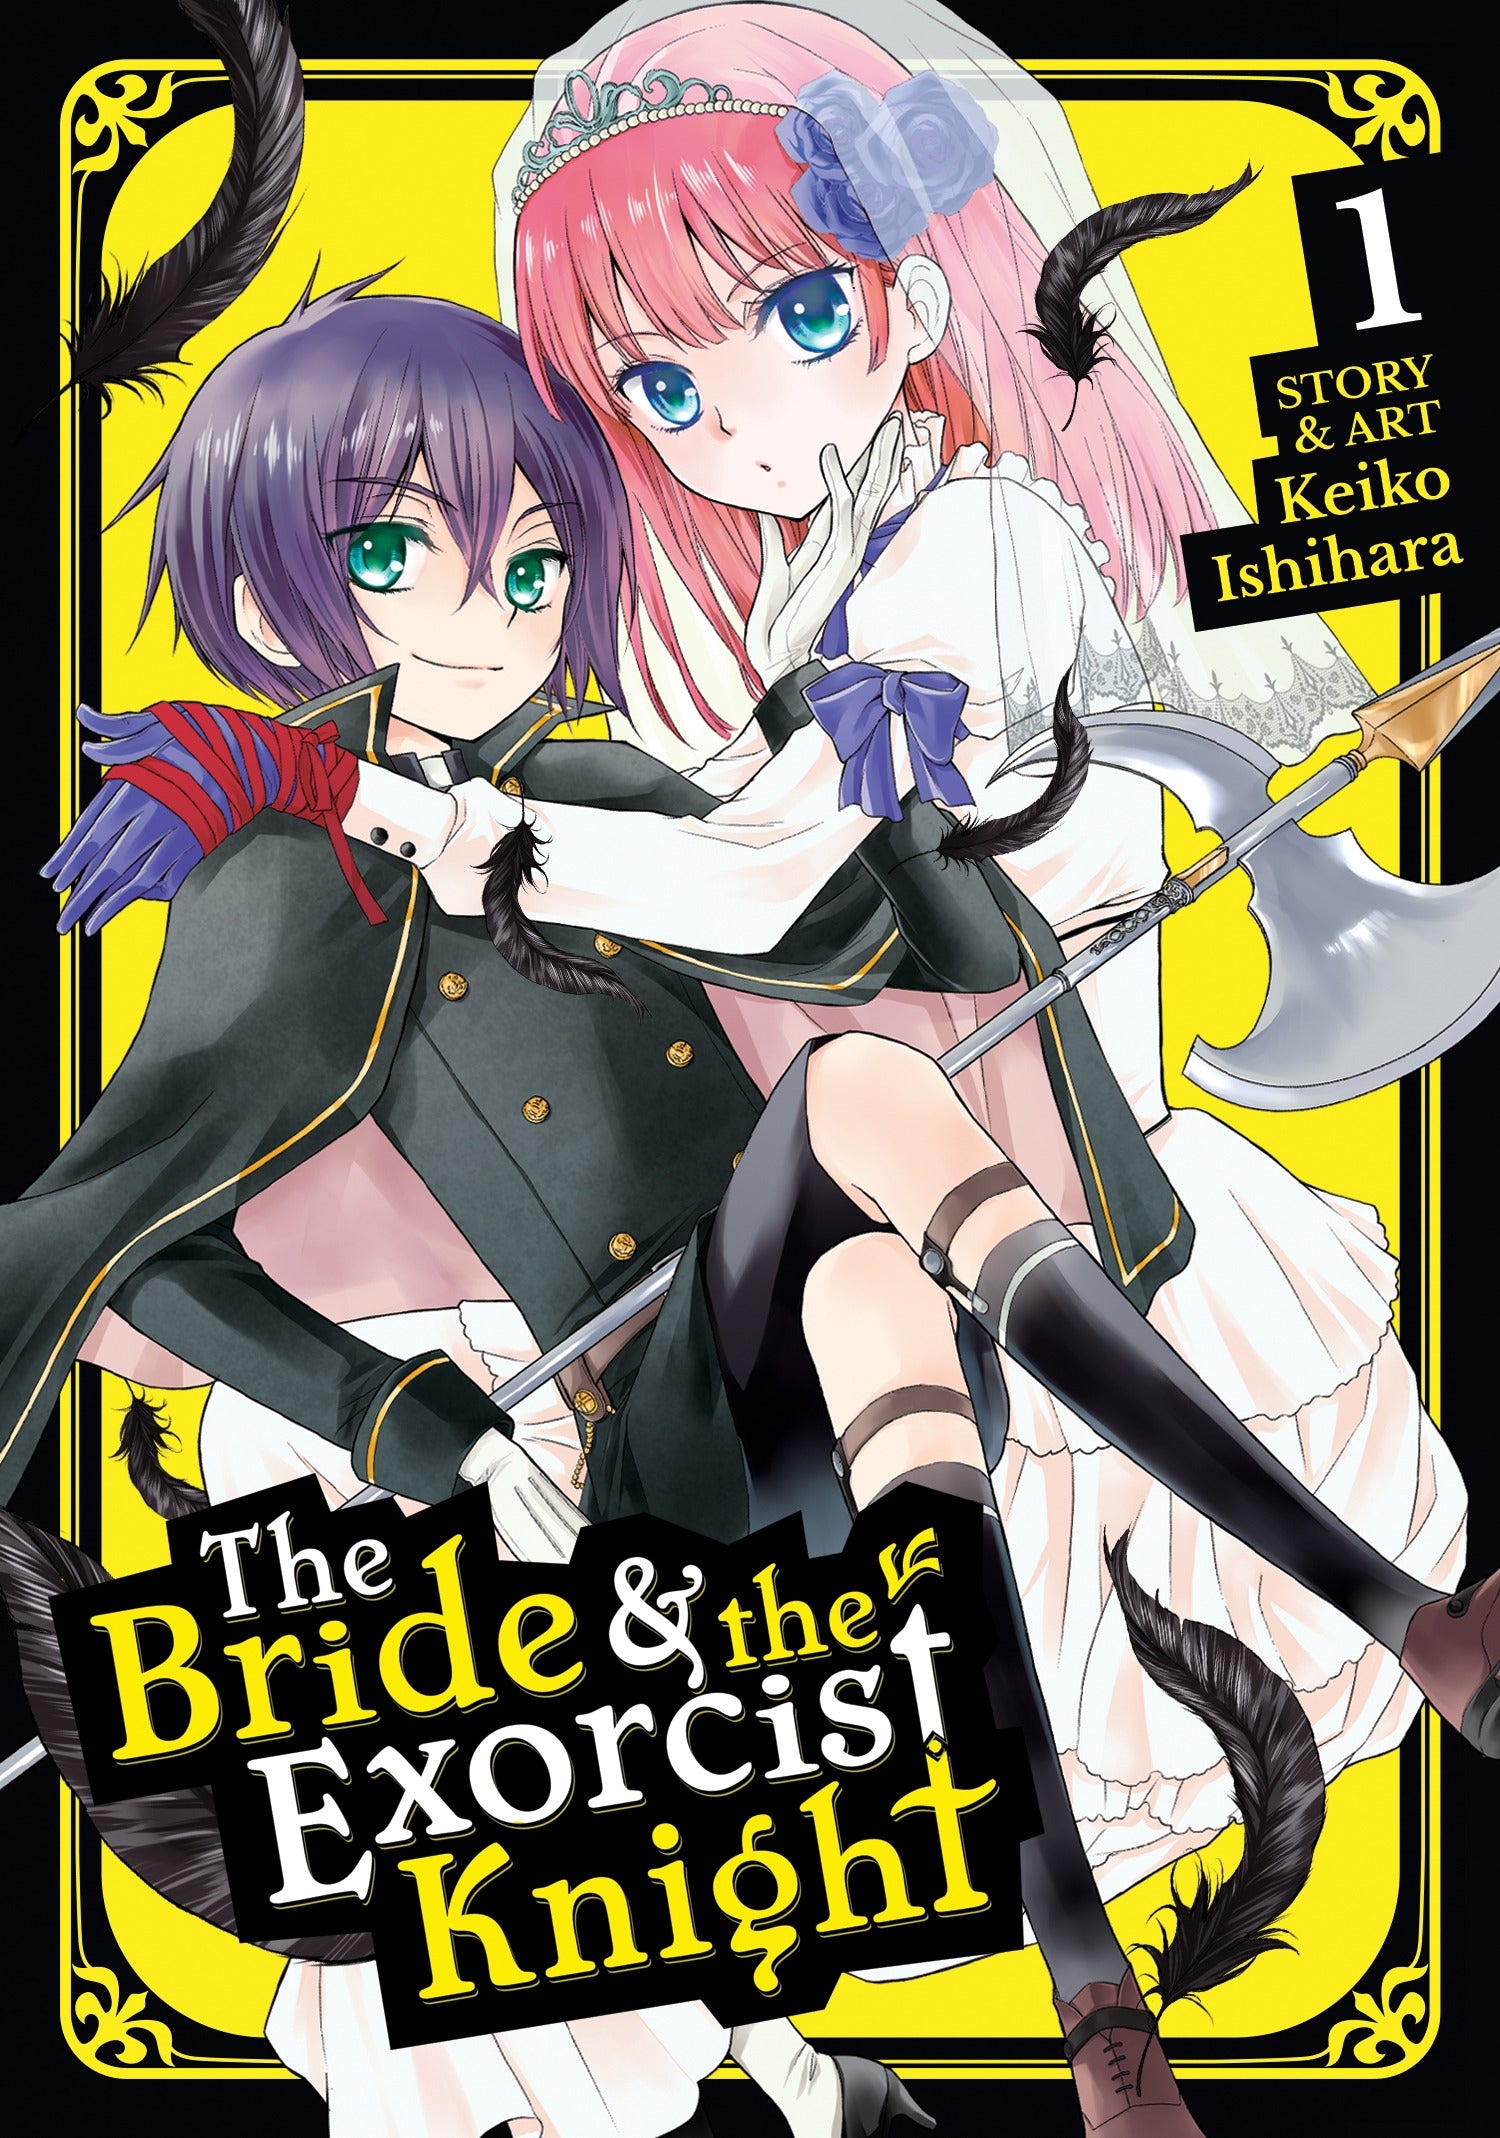 The Bride & the Exorcist Knight, Vol. 1